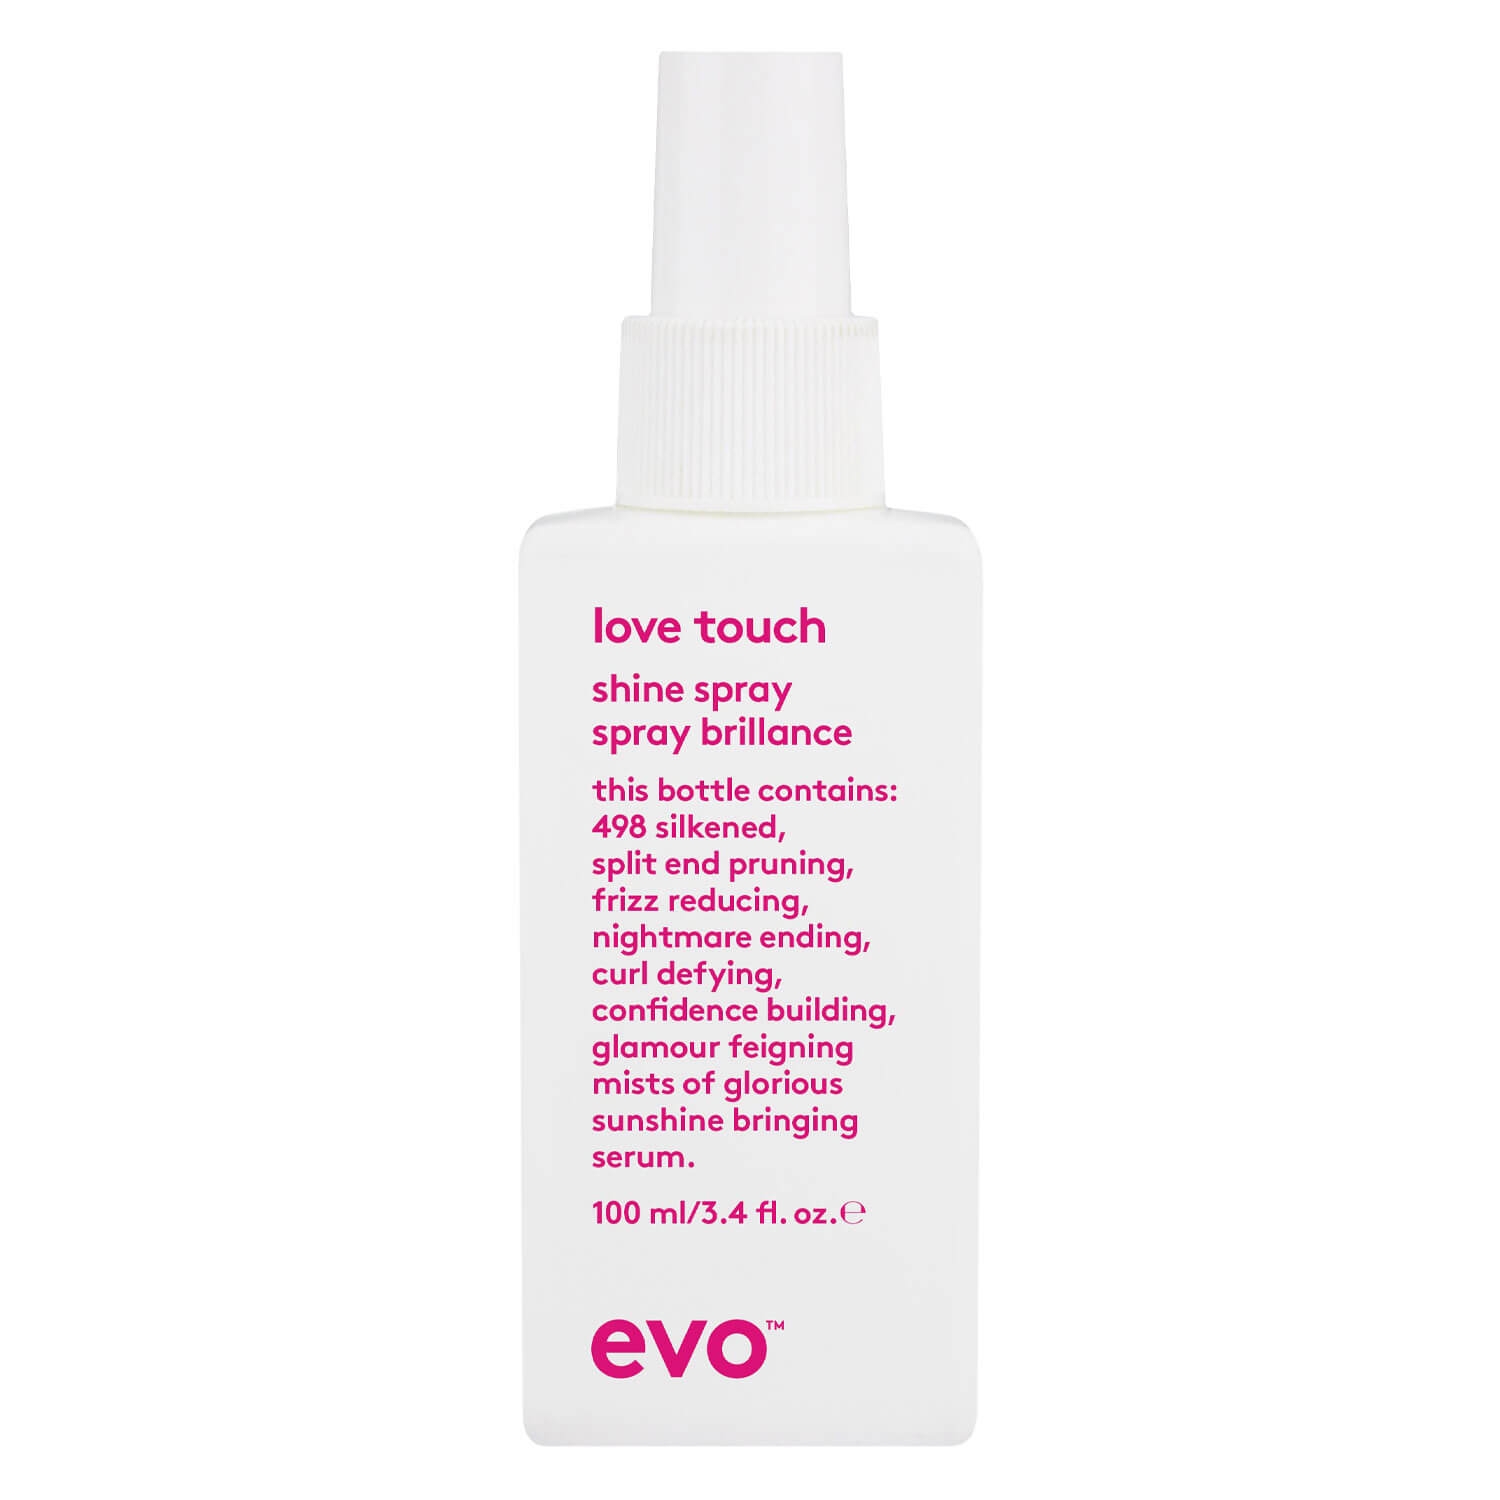 Product image from evo smooth - love touch shine spray